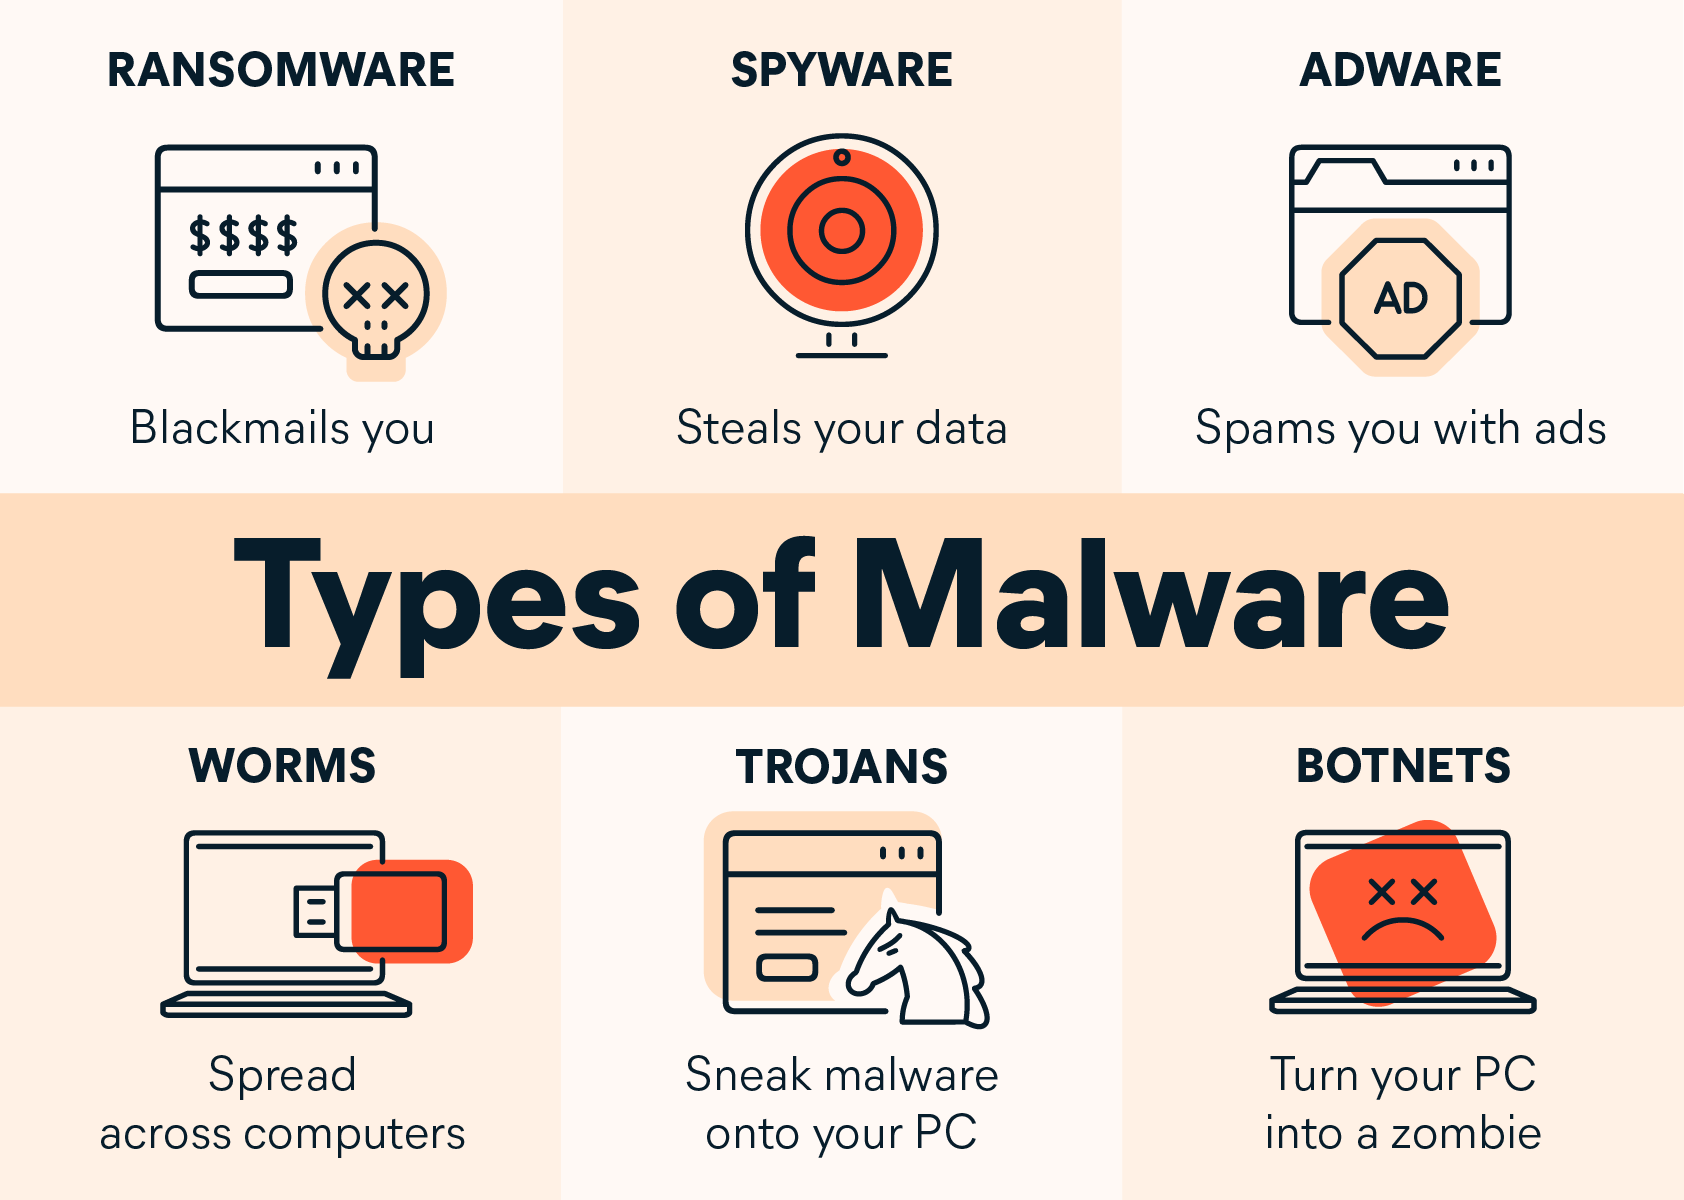 Infographic with a header "Types of Malware" with 6 boxes of examples. First box says "Ransomware - Blackmails you" with an image of a fake bank account webpage and a skull. Second box says "Spyware - Steals your data" with a camera. Third box says "Adware - Spams you with ads" with a stop sign that says "Ad" on top of a webpage. Fourth box says "Worms - Spread" with an image of a USB drive and laptop. Fifth box says "Trojans - Sneak malware" with an image of a trojan horse in front of a webpage. Sixth box says "Botnets - Turn your PC".